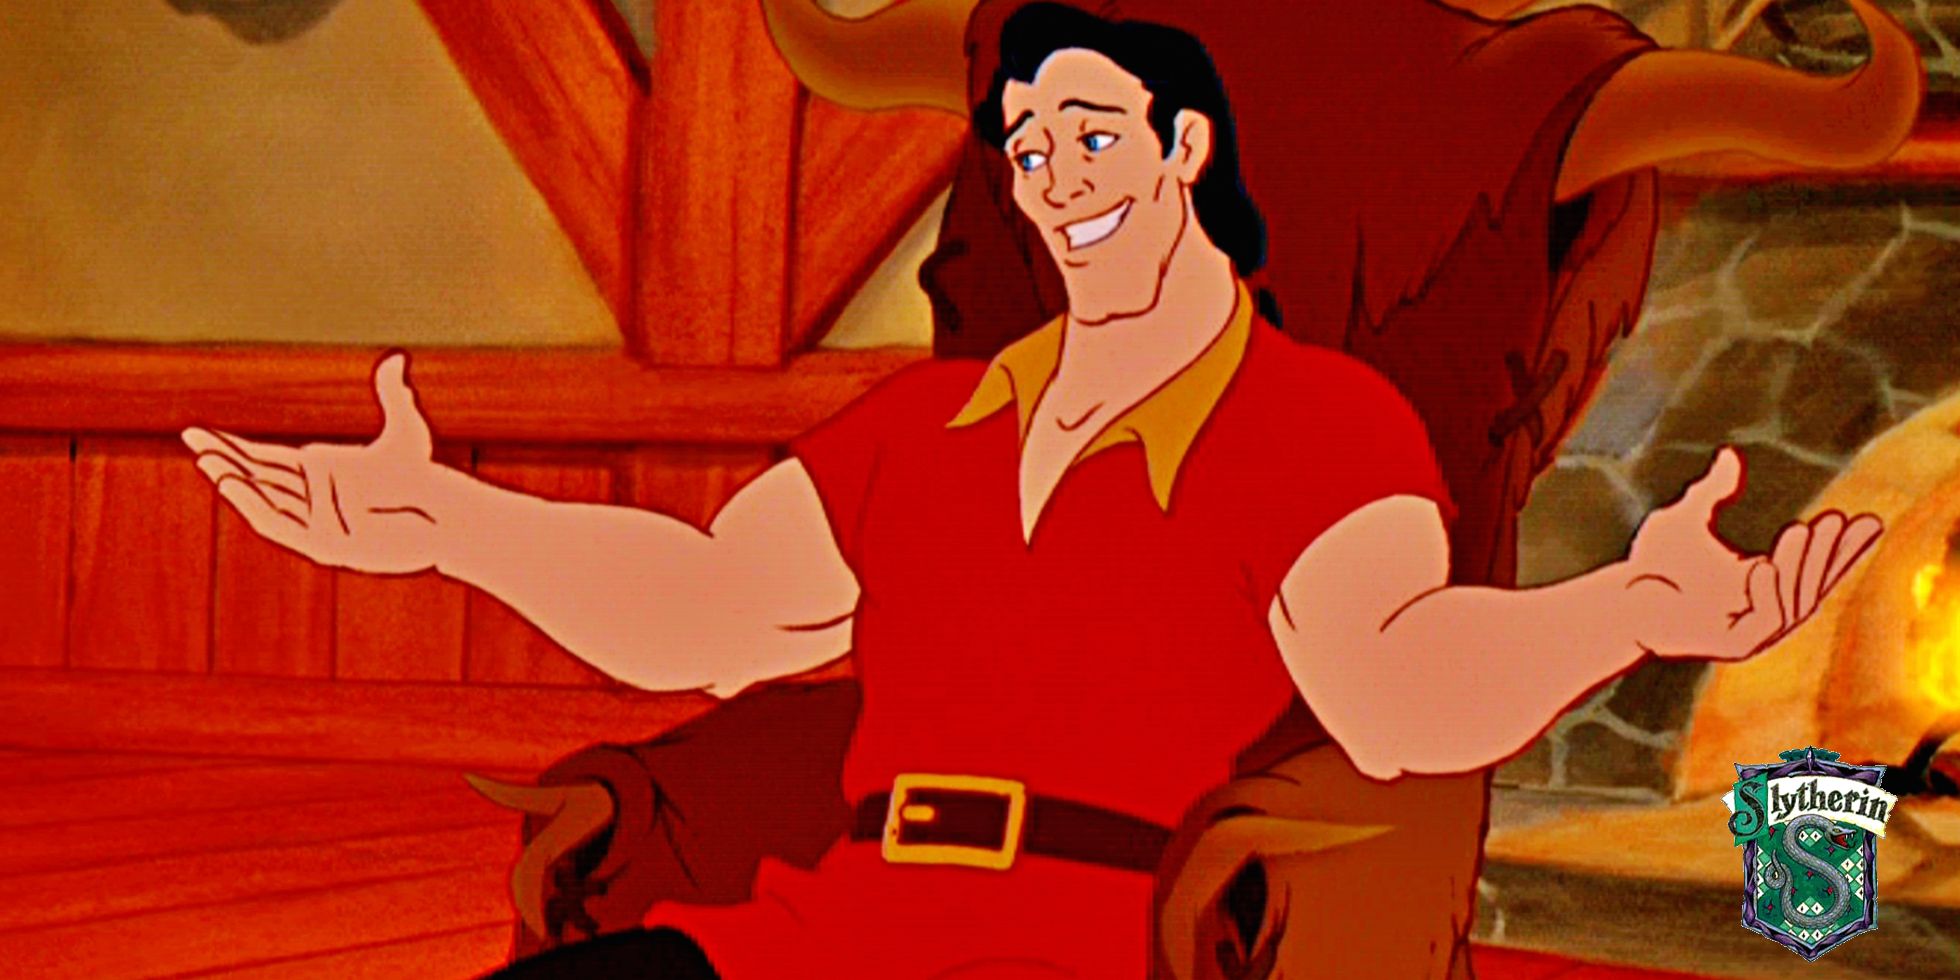 Gaston In Disney Beauty And The Beast Slytherin